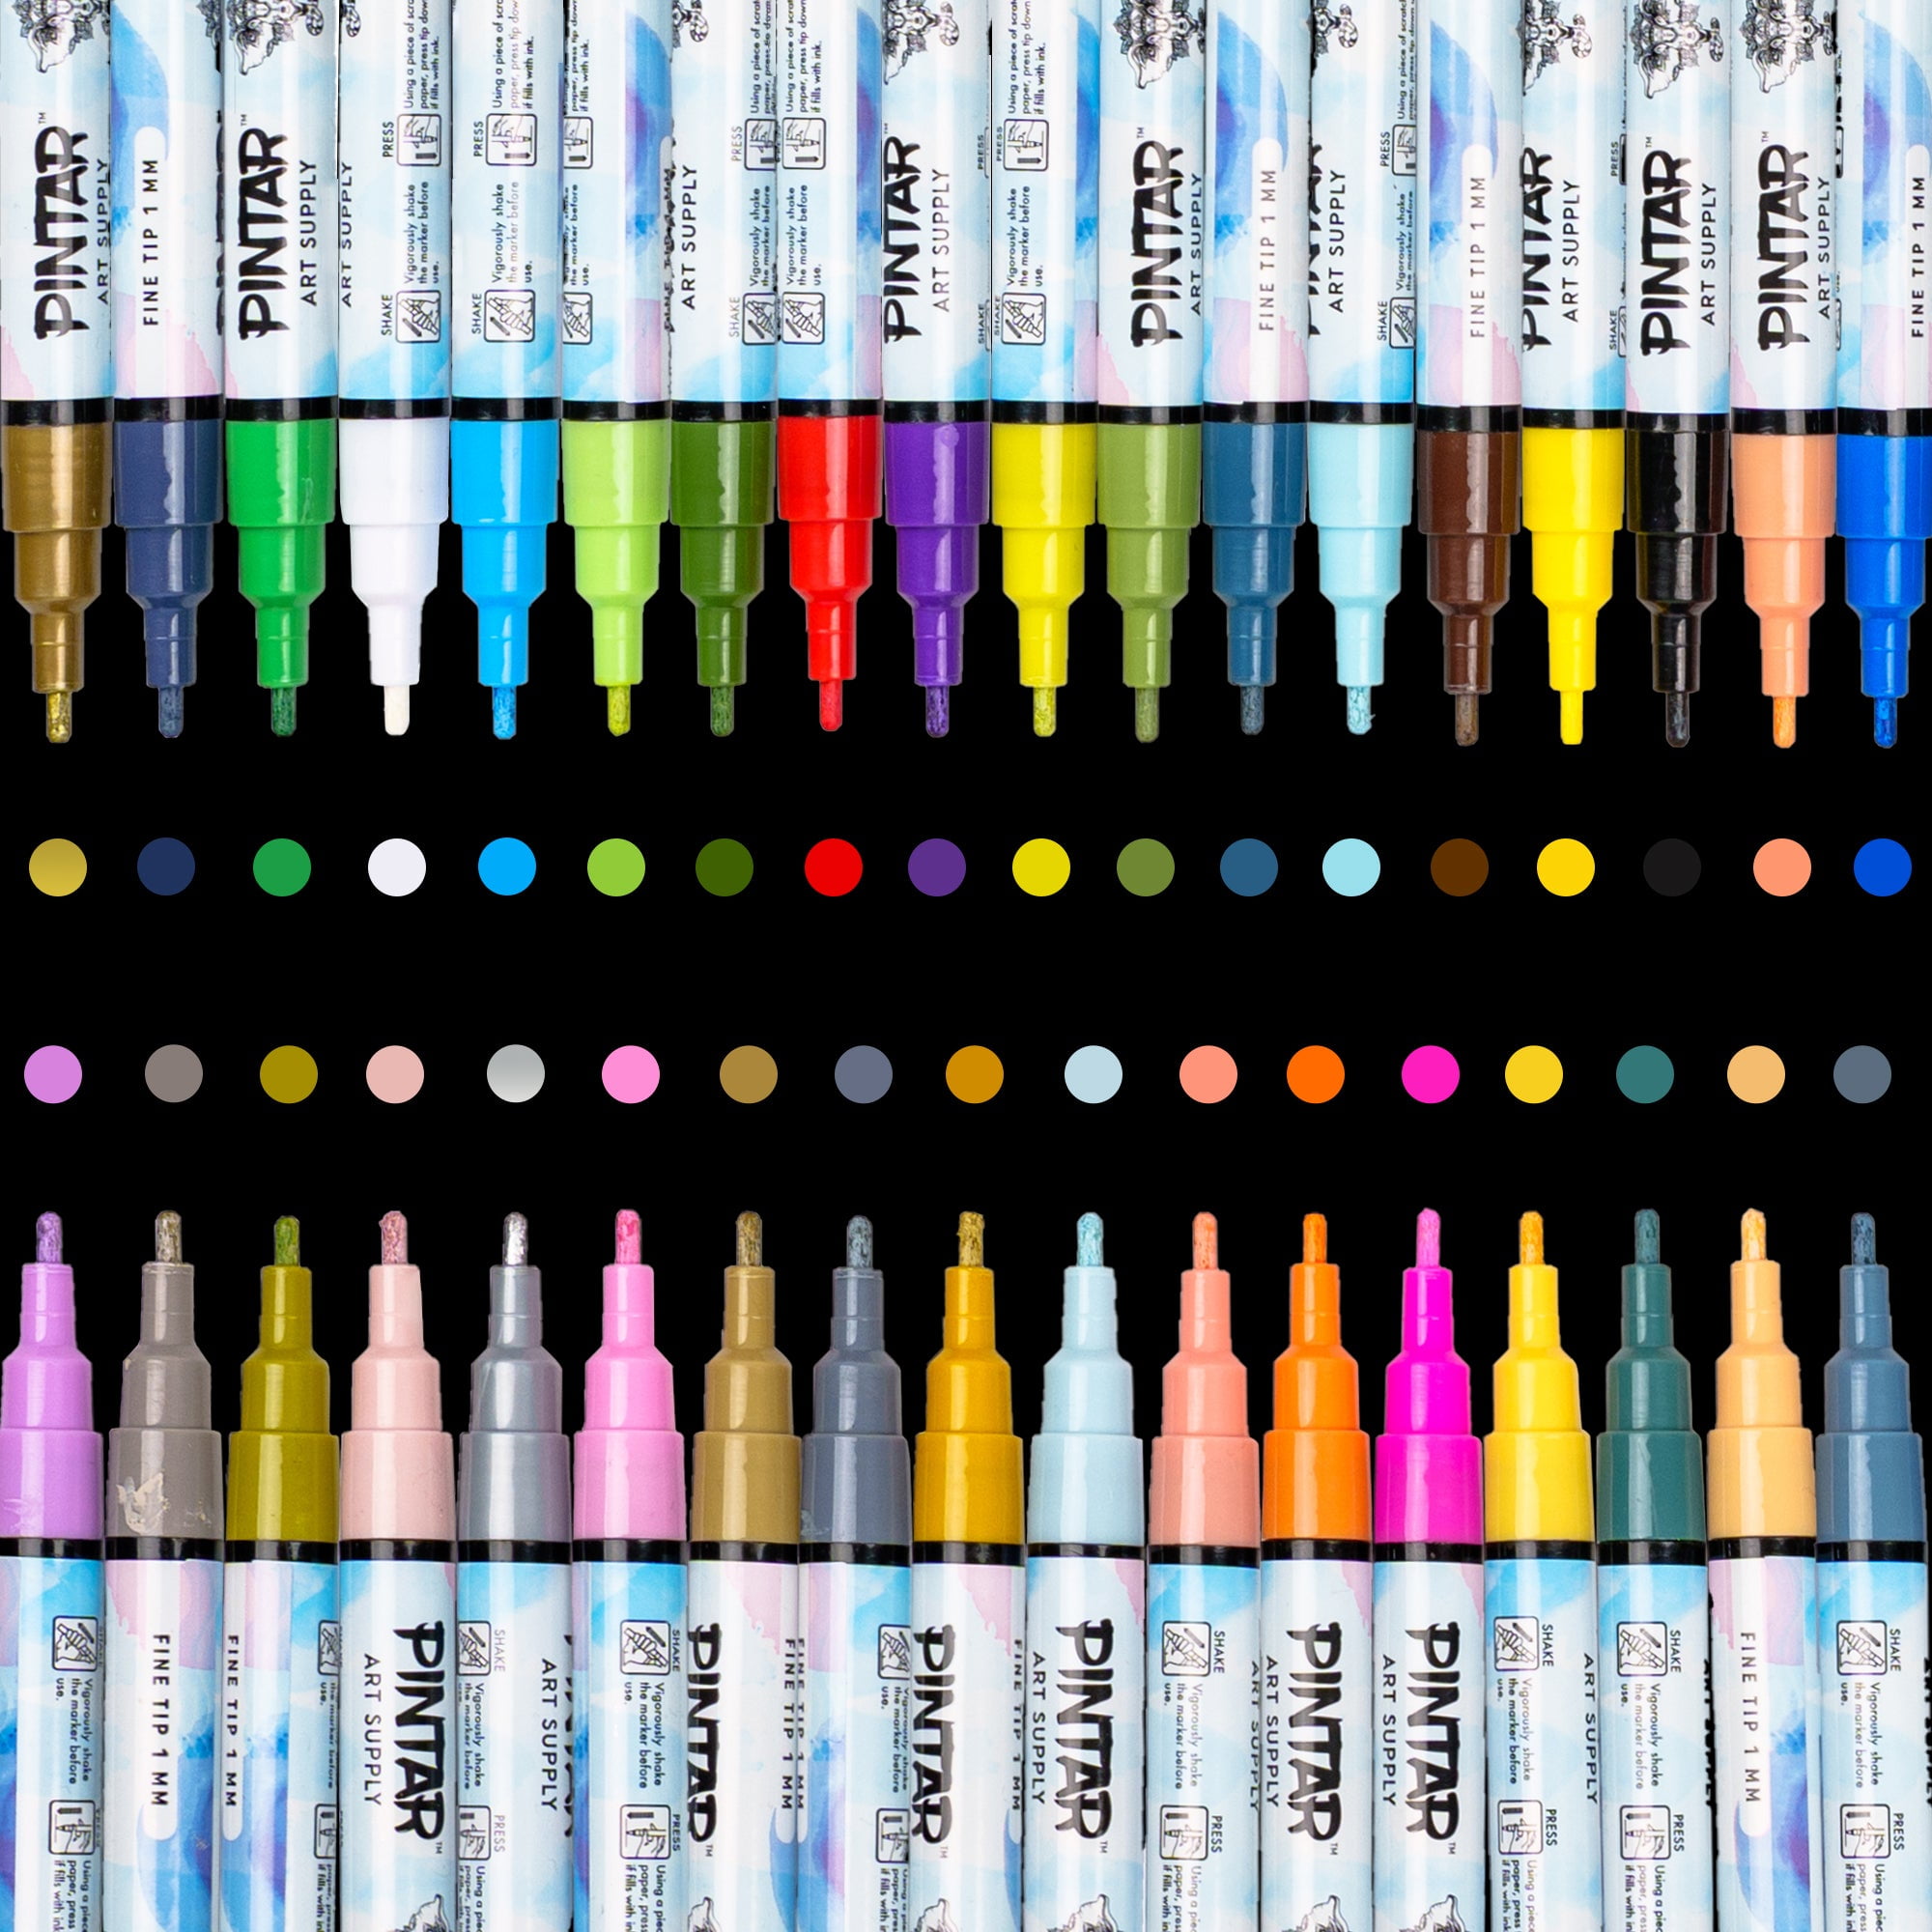 24 Colors Paint Marker Pens 24 Textile and Fabric Markers Washable